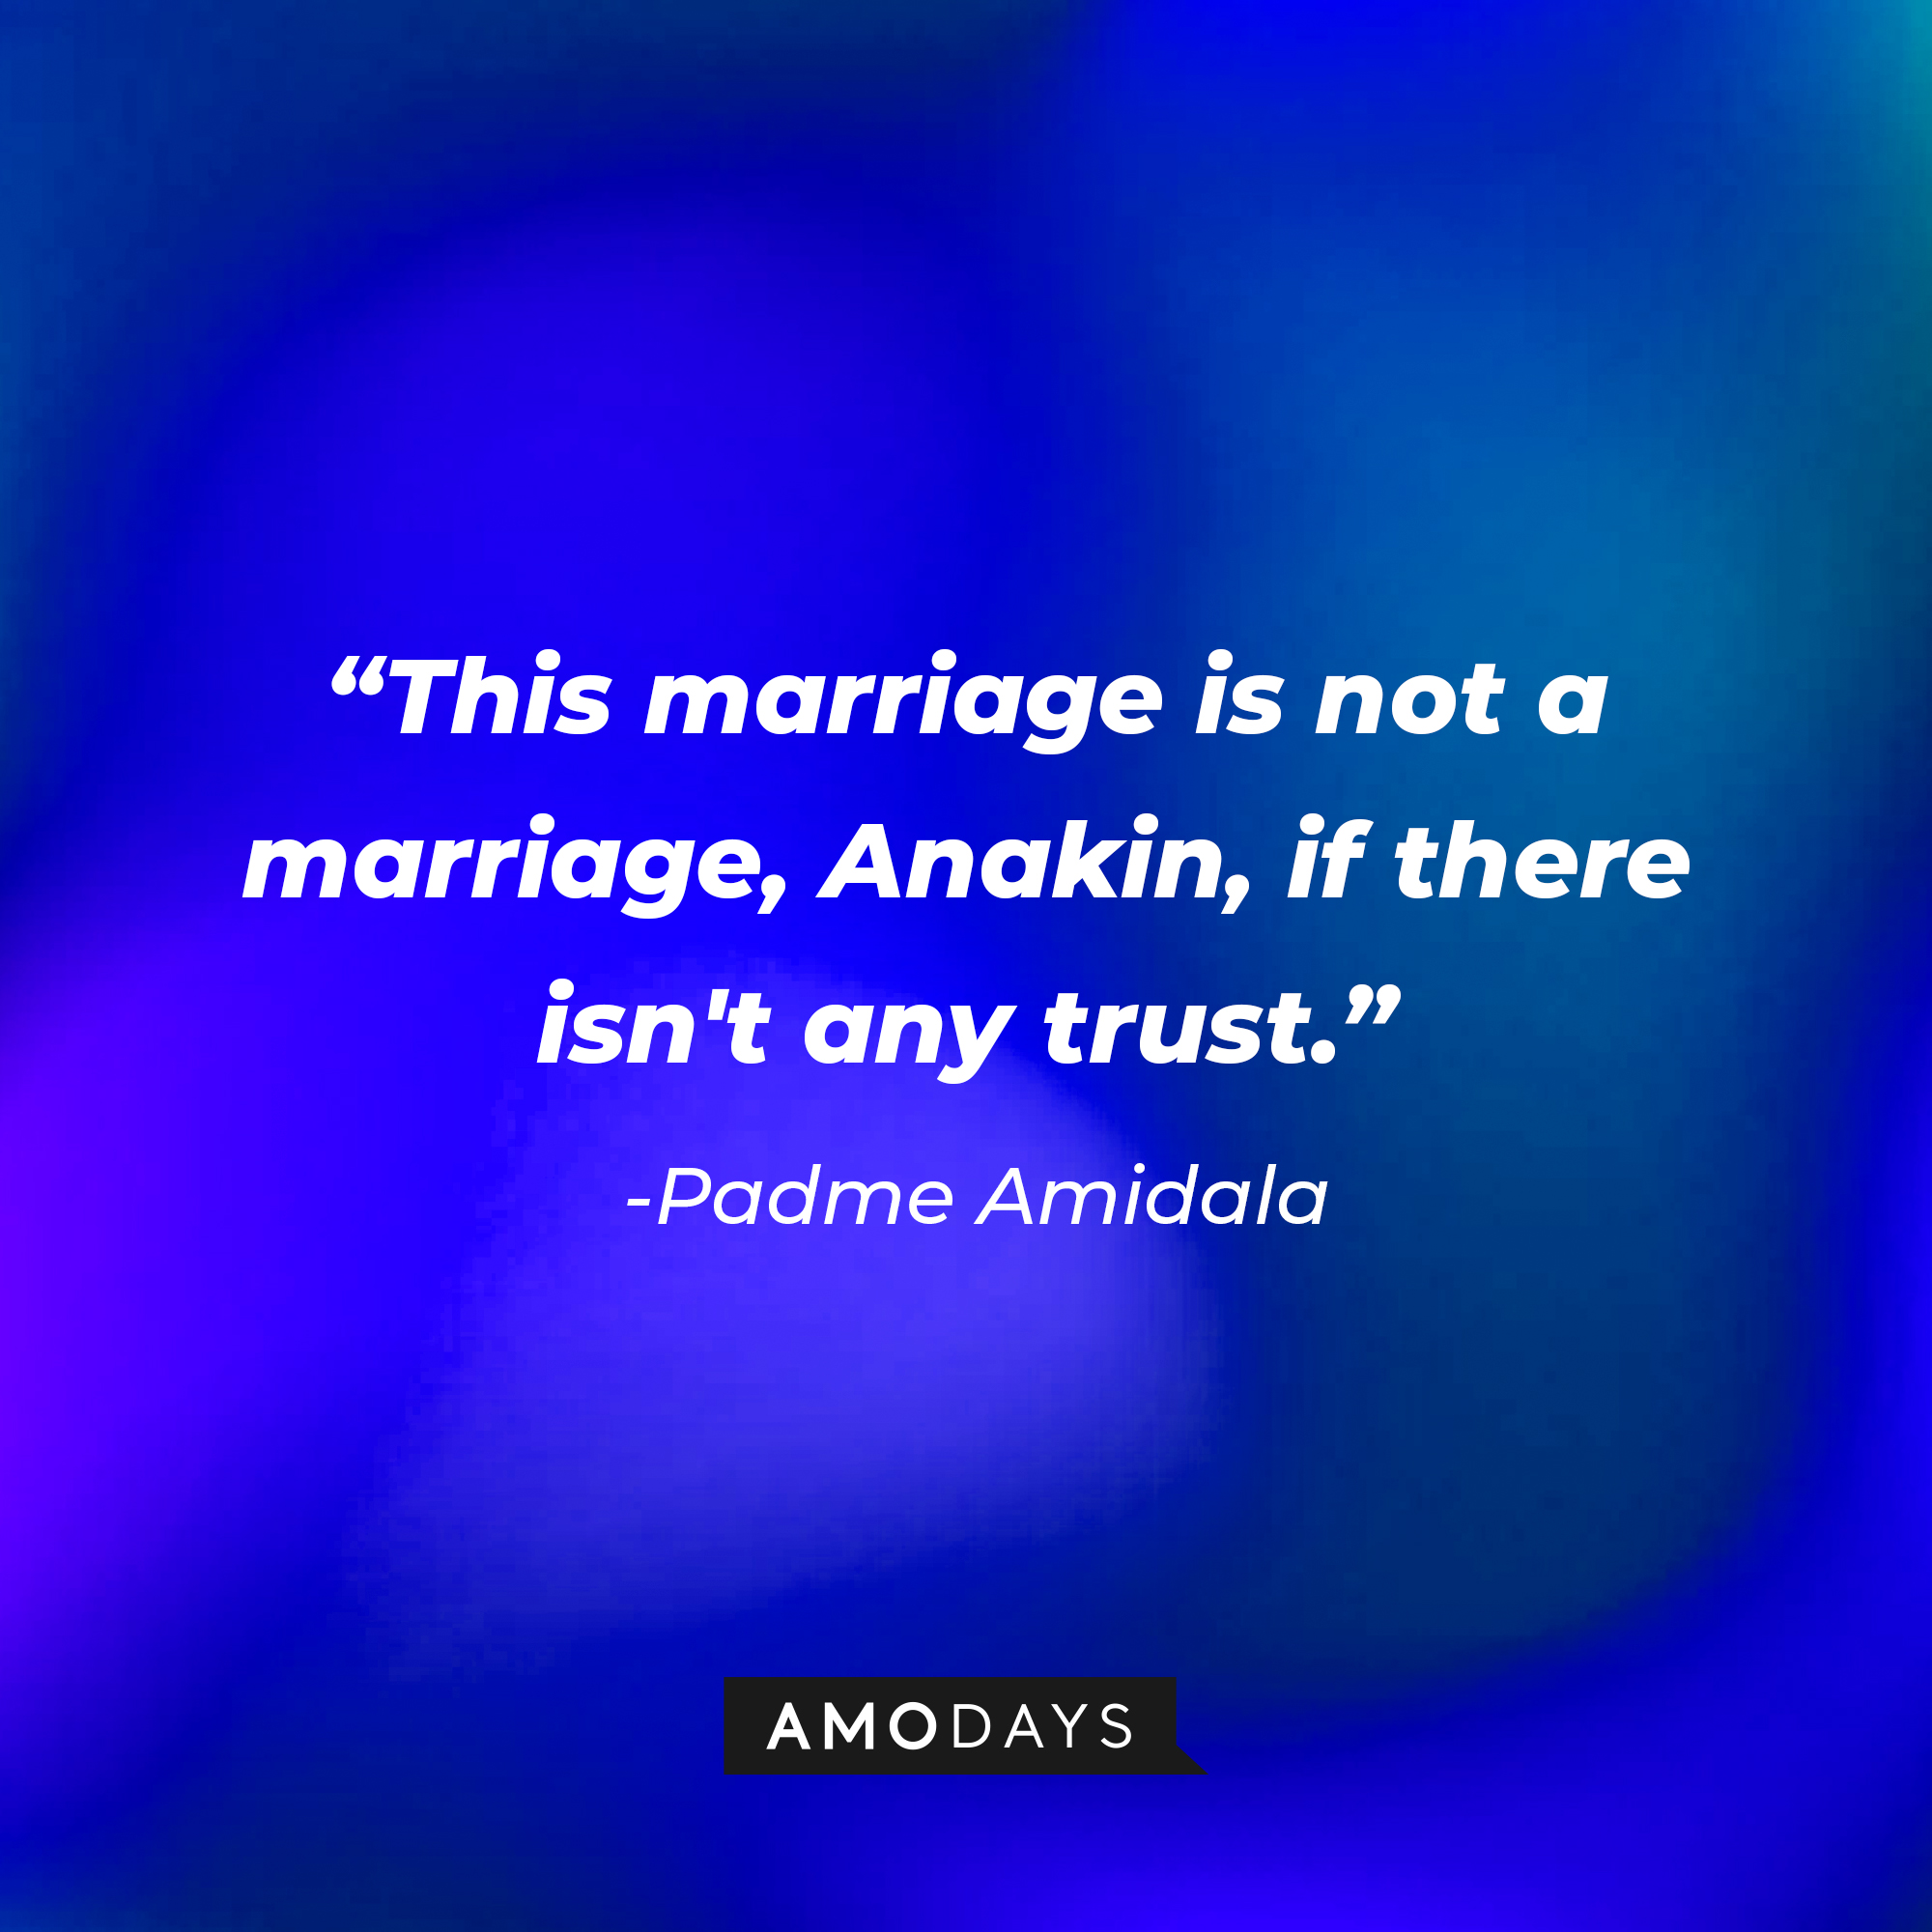 Padme Amidala's quote: "This marriage is not a marriage, Anakin, if there isn't any trust." | Source: AmoDays